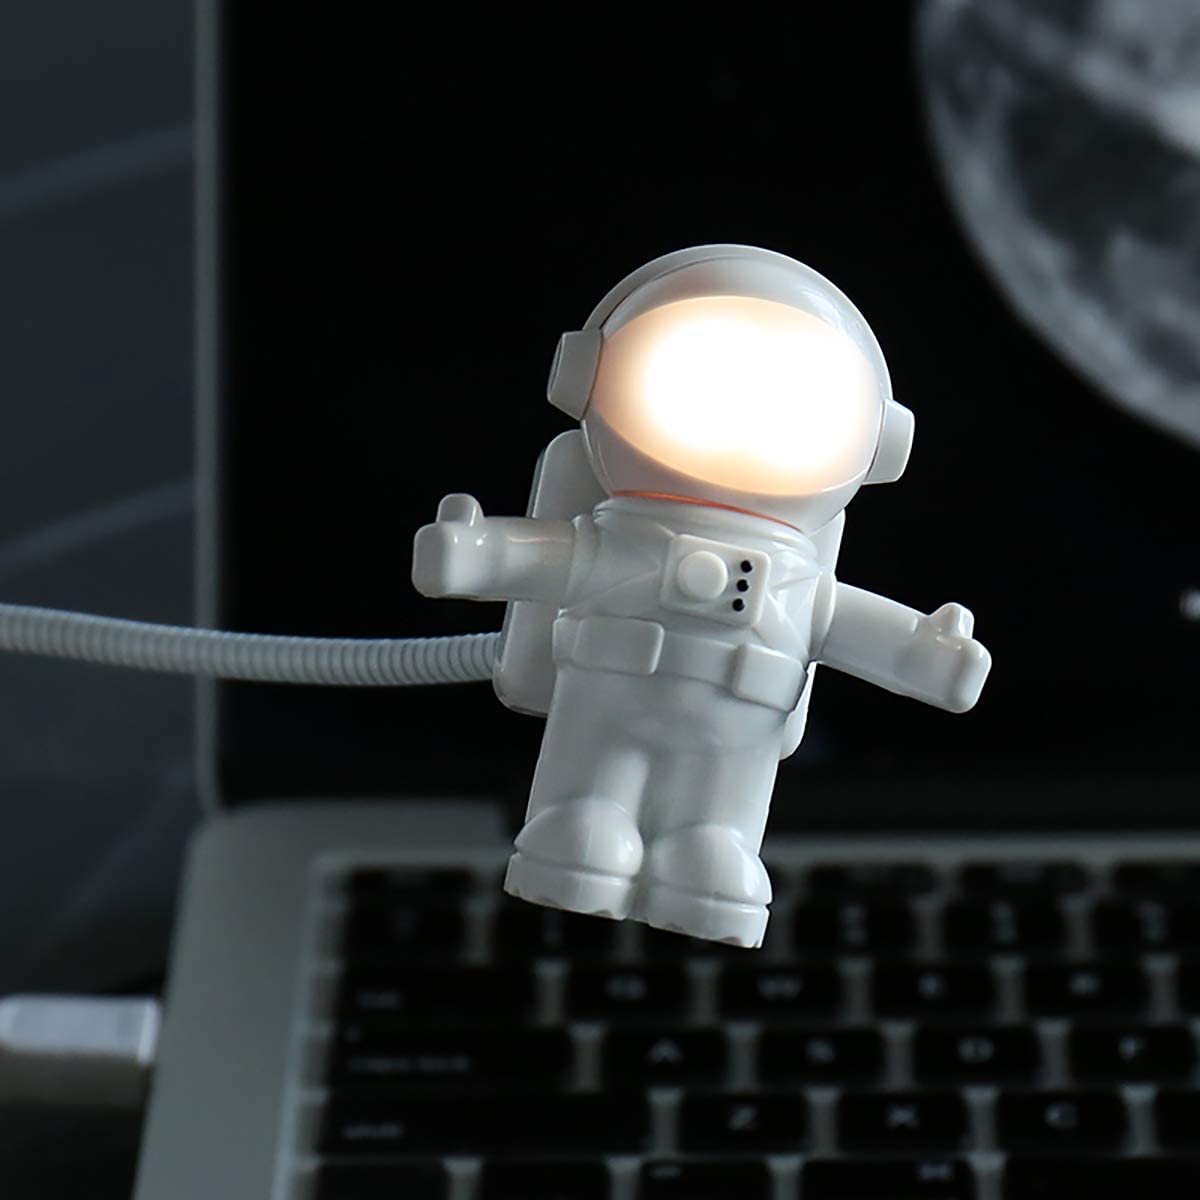 Astronaut USB LED Light Cool Birthday Gifts For Guys